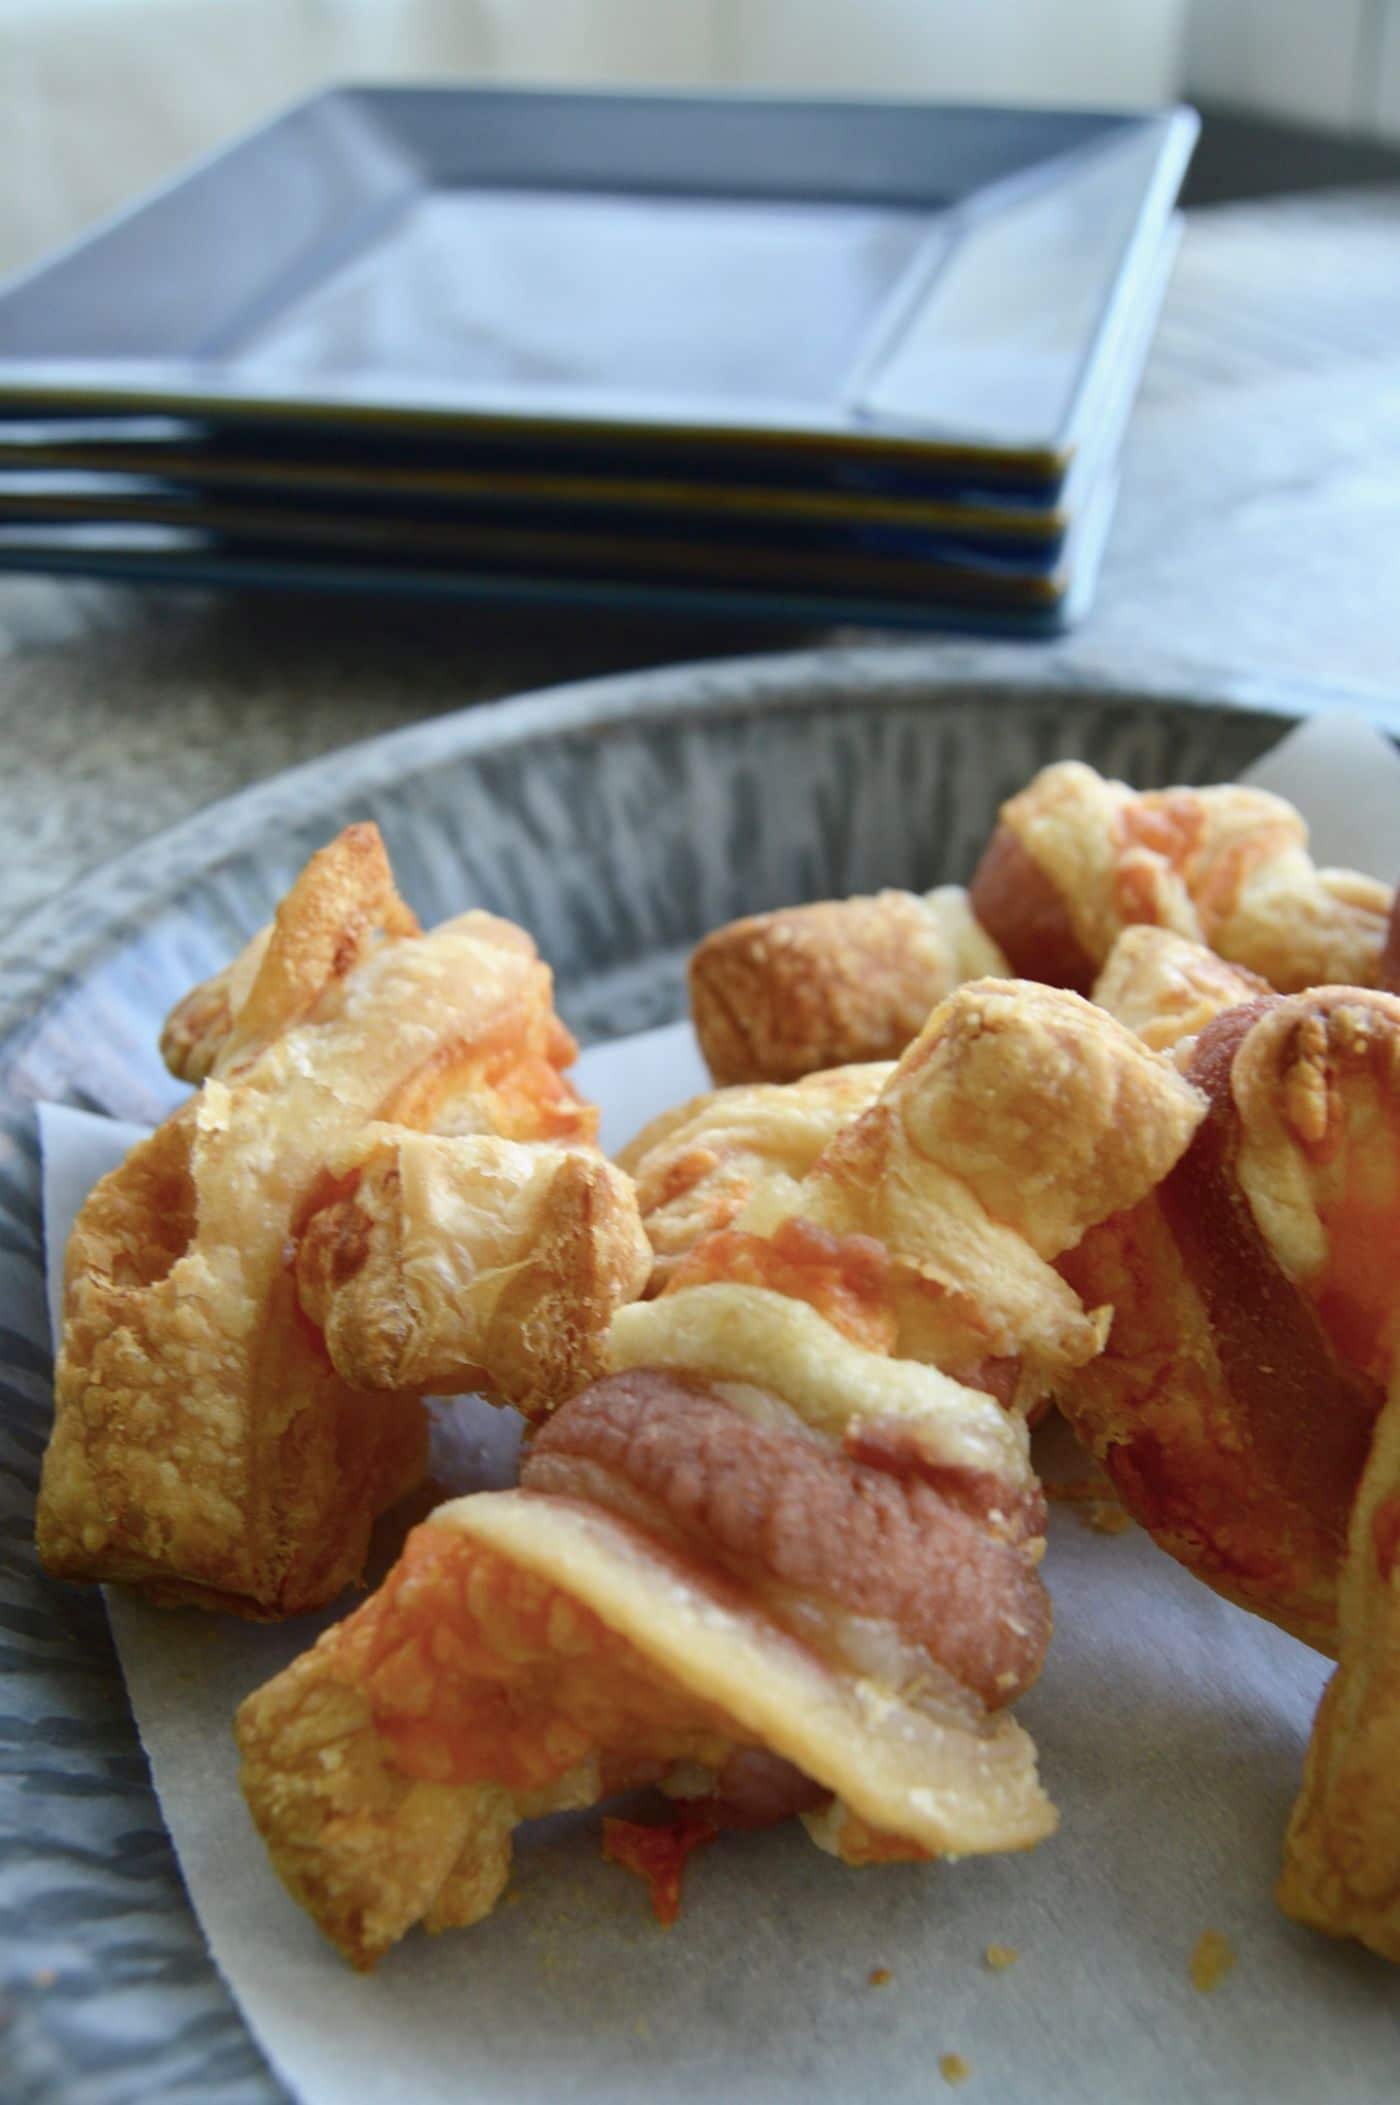 Bacon Cheese Pastry Puffs can be made quickly and with things you already have in your fridge. Cheesy in the center, wrapped with bacon each puff pastry bite is jammed full of flavor.